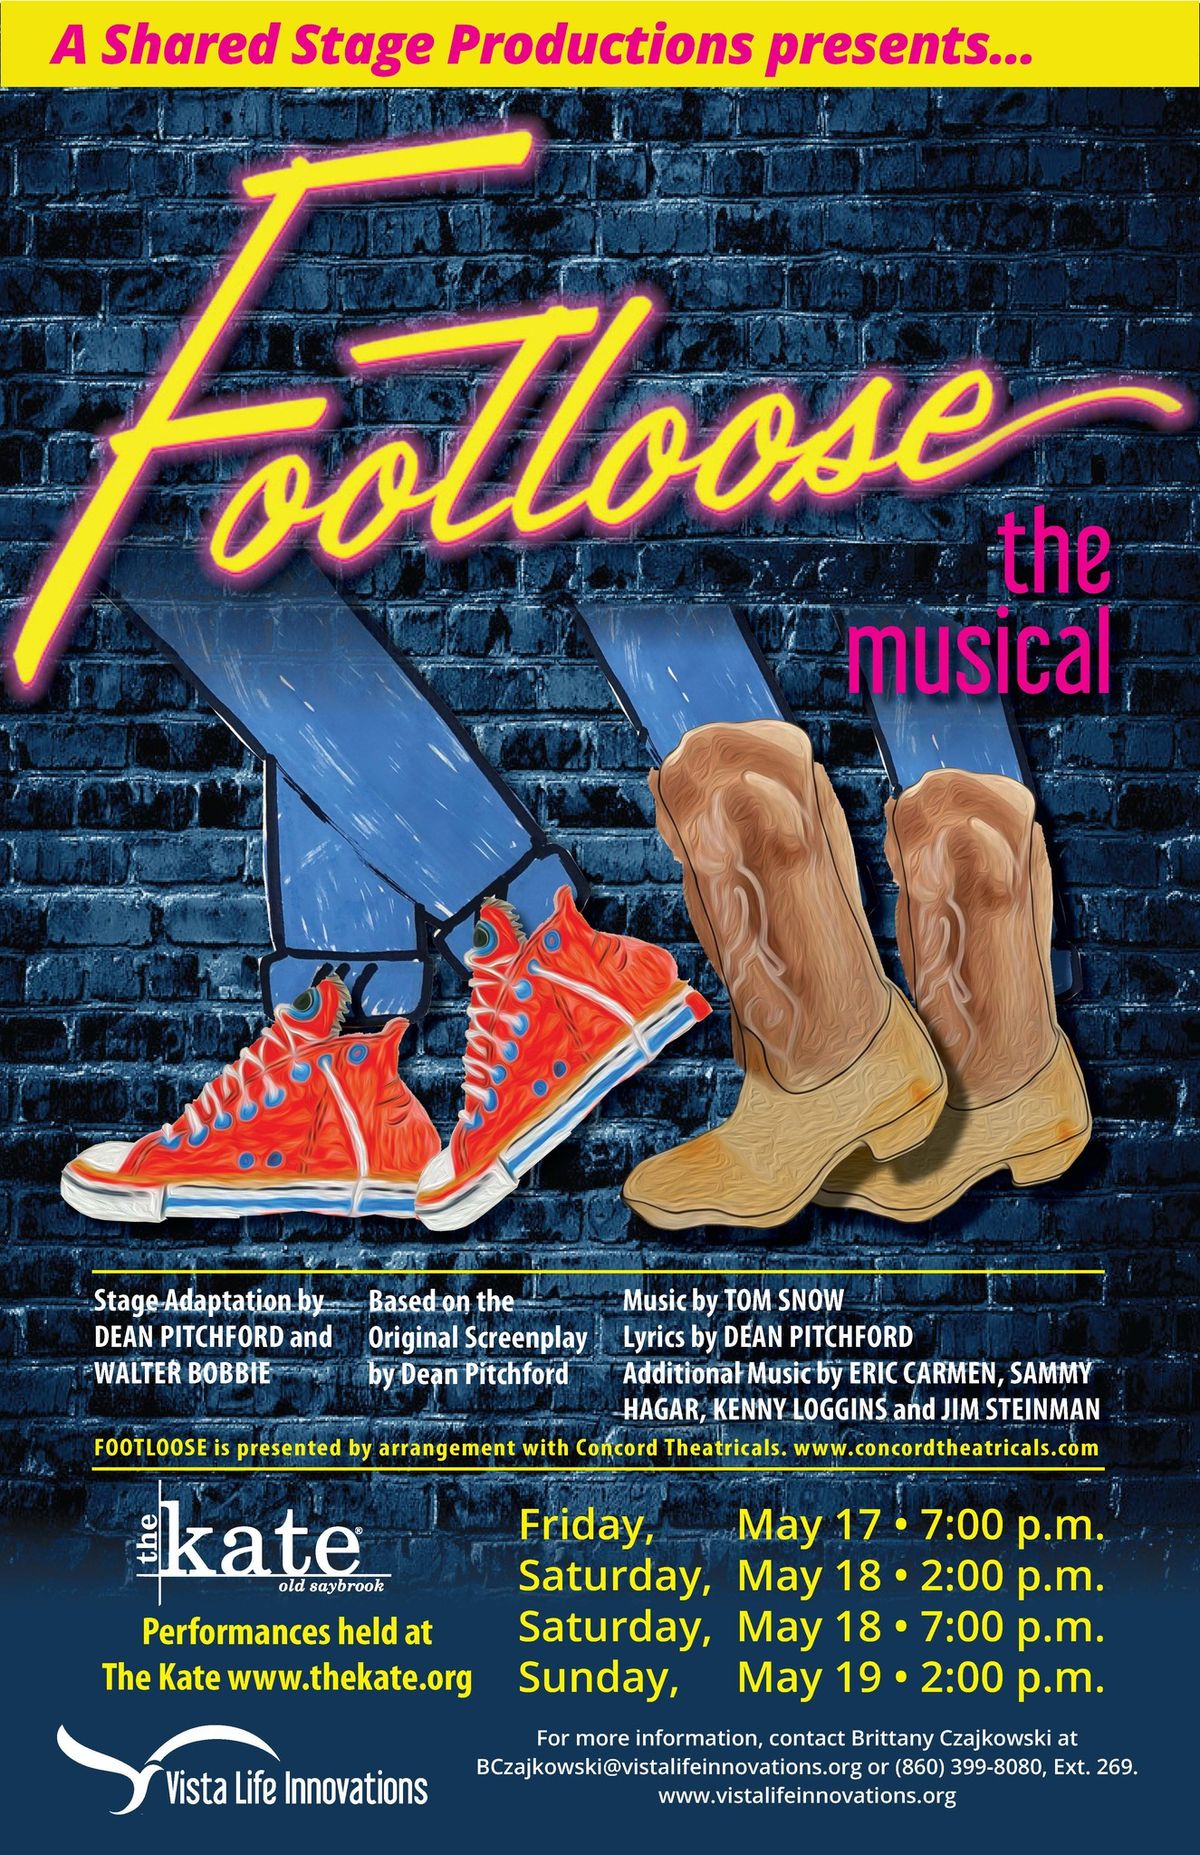 Footloose - A Shared Stage Production